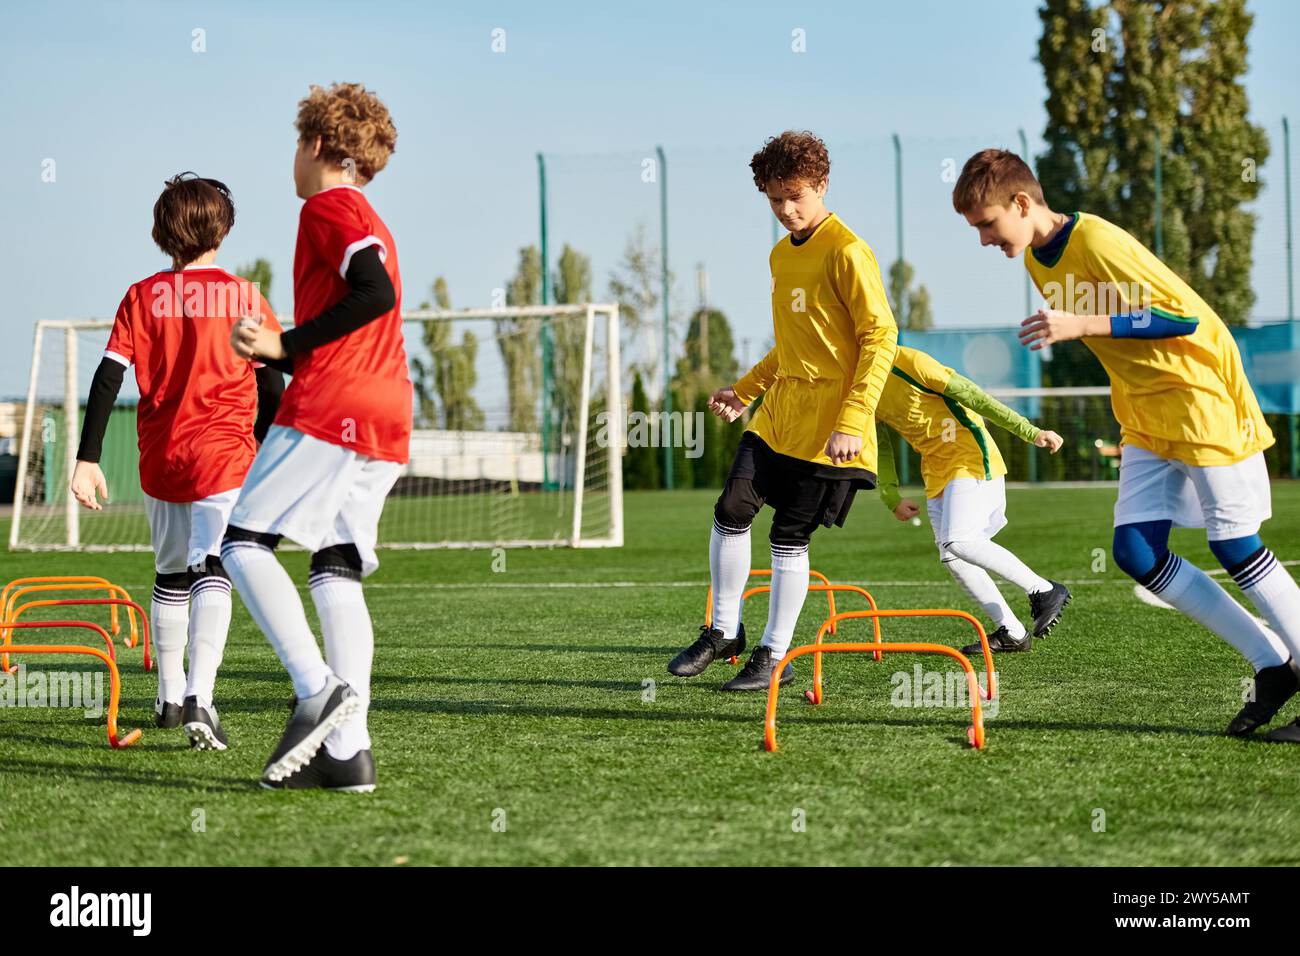 A dynamic scene of a group of young men engaged in an exhilarating game of soccer, running, passing, and kicking the ball with precision and skill on Stock Photo